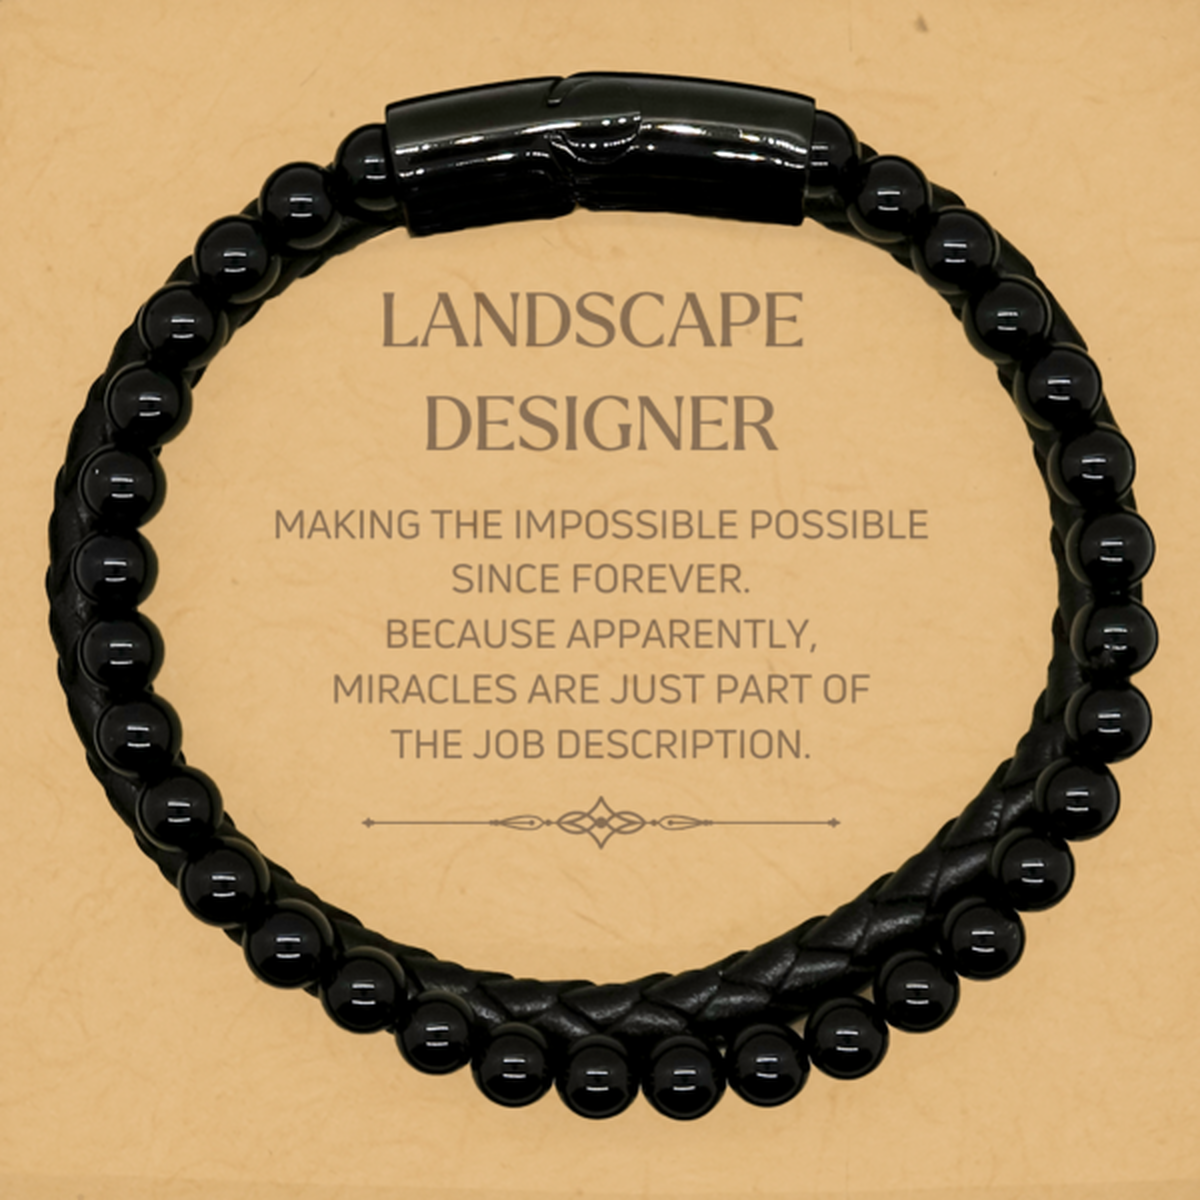 Funny Landscape Designer Gifts, Miracles are just part of the job description, Inspirational Birthday Stone Leather Bracelets For Landscape Designer, Men, Women, Coworkers, Friends, Boss